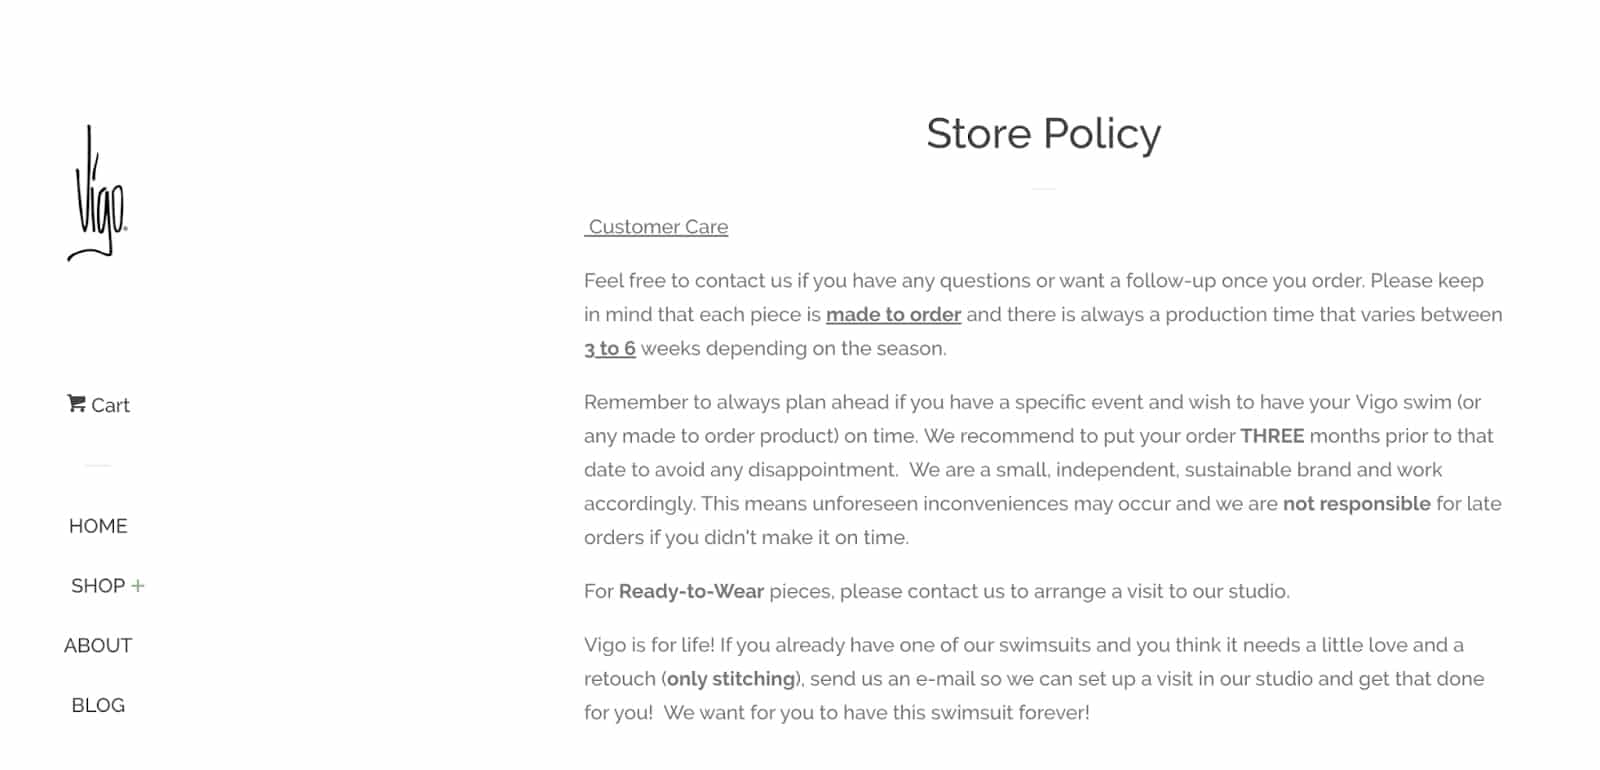 An example image of Store Policy.